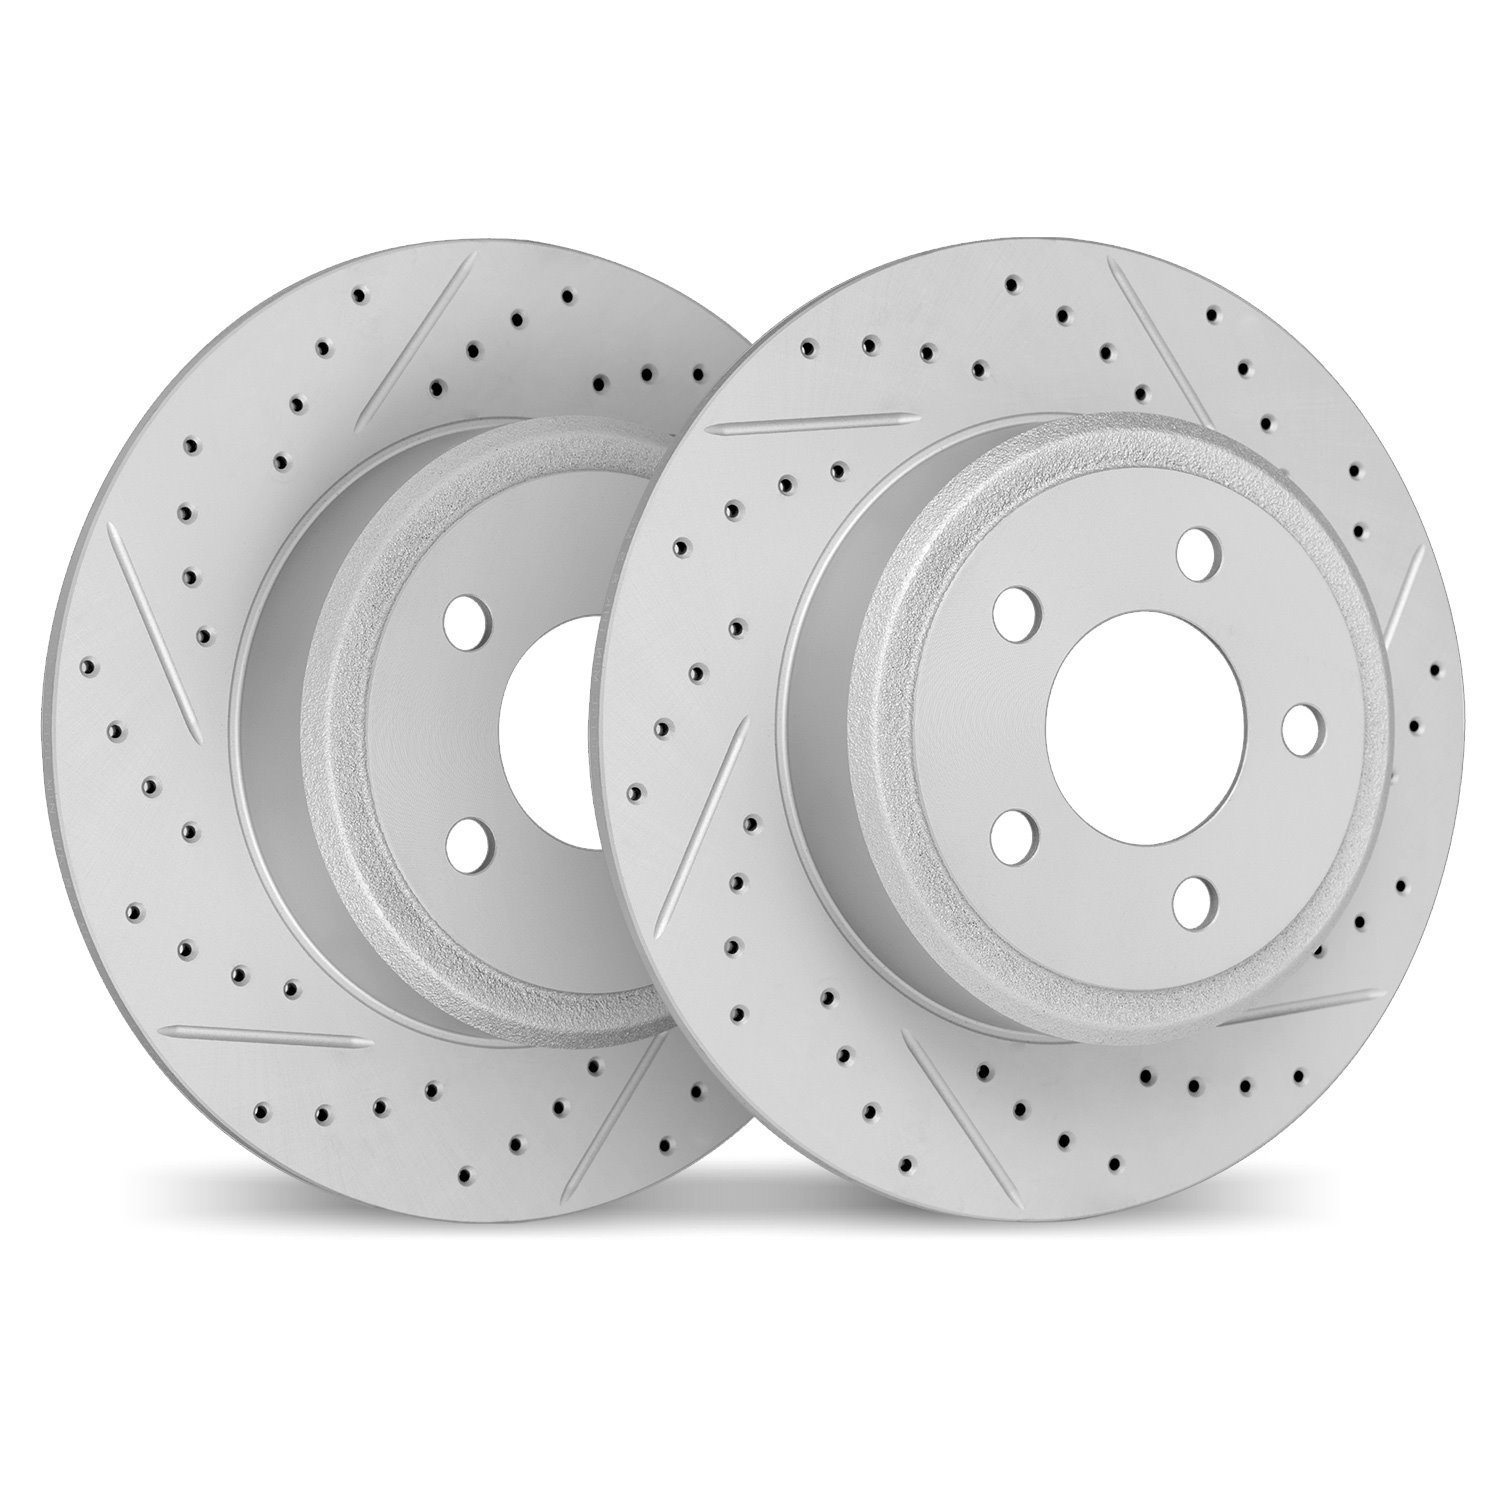 2002-63069 Geoperformance Drilled/Slotted Brake Rotors, Fits Select Mercedes-Benz, Position: Rear